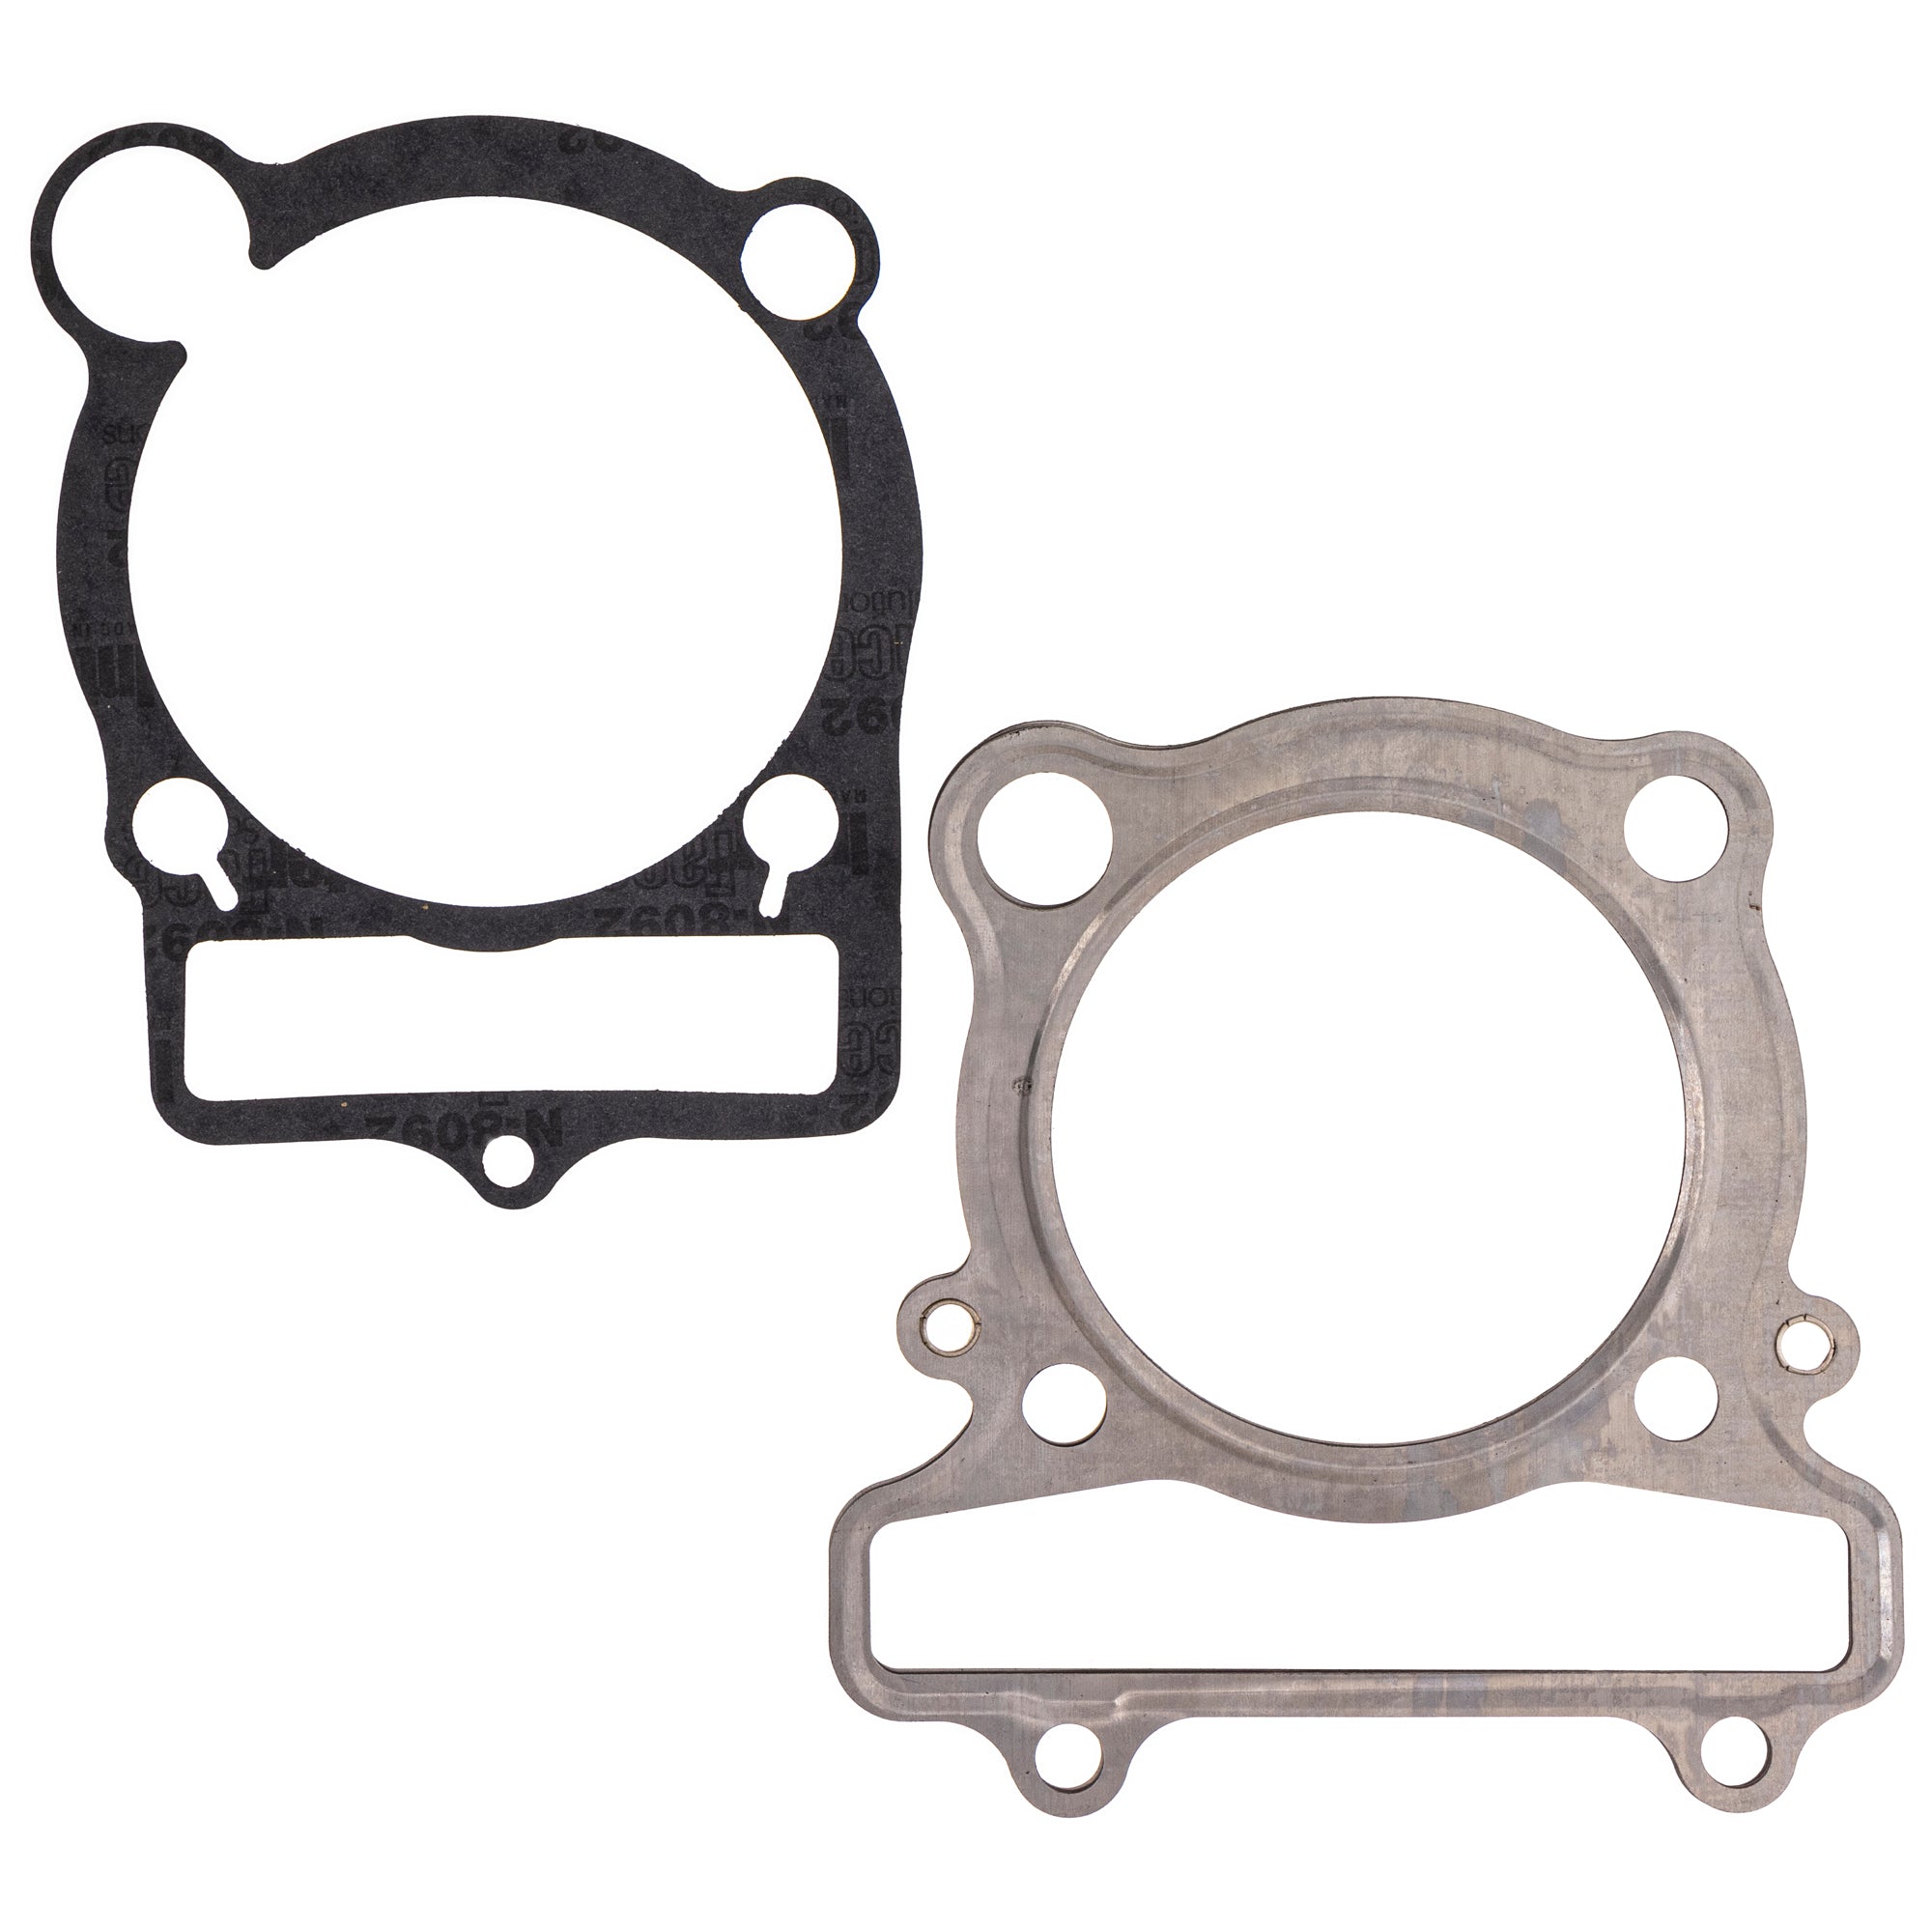 Standard Bore Top End Repair Kit for Yamaha Raptor Warrior Grizzly